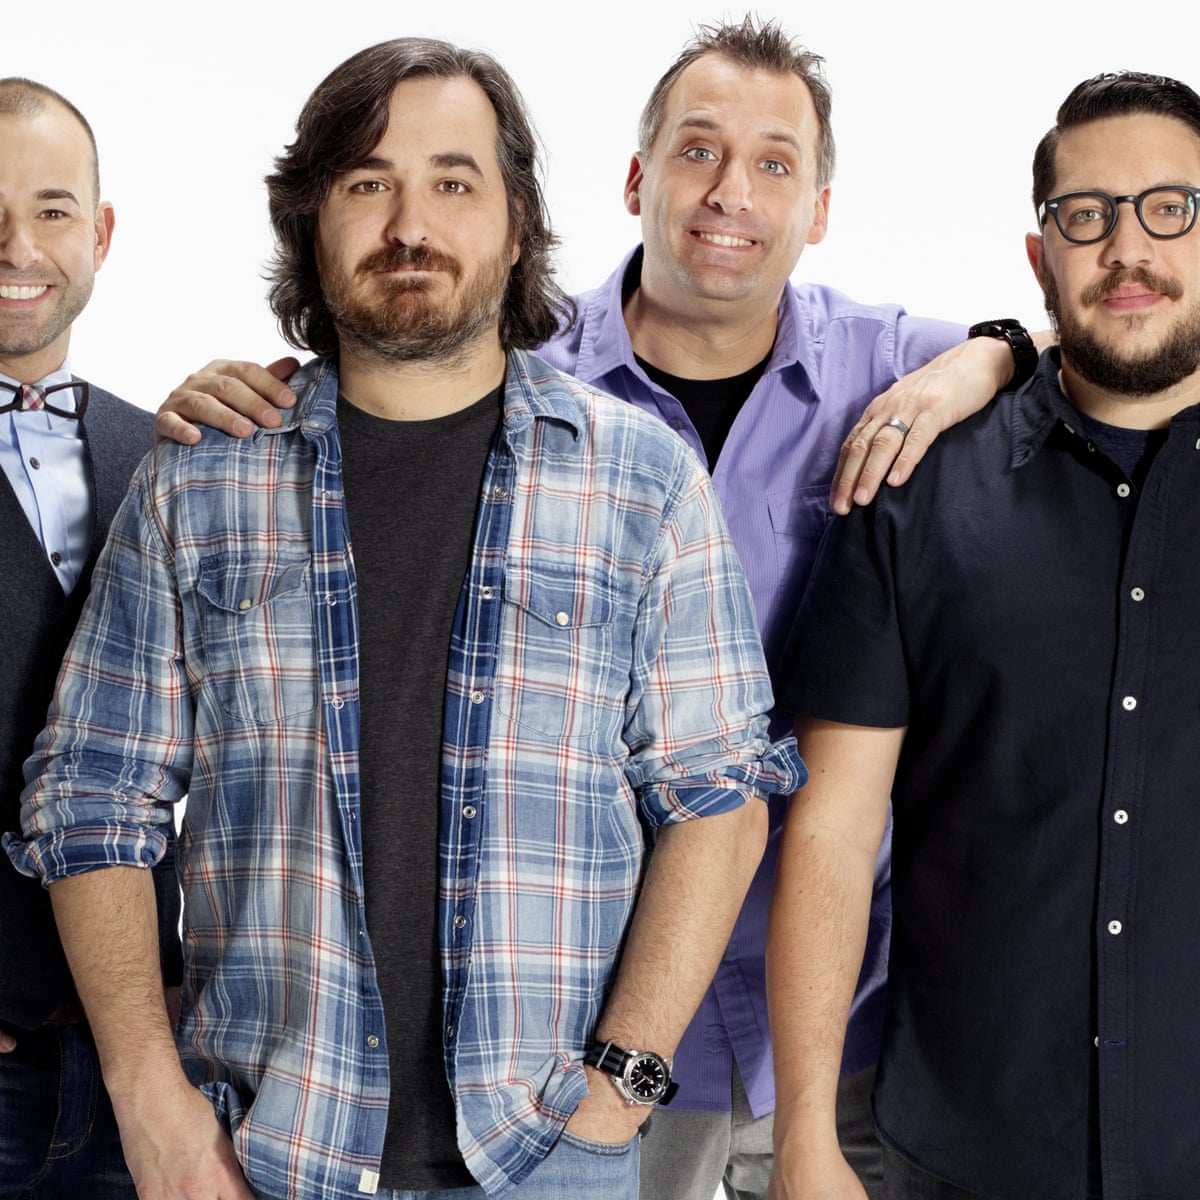 Stick your finger in their ear': a crash course in pranking from  Impractical Jokers | Television | The Guardian